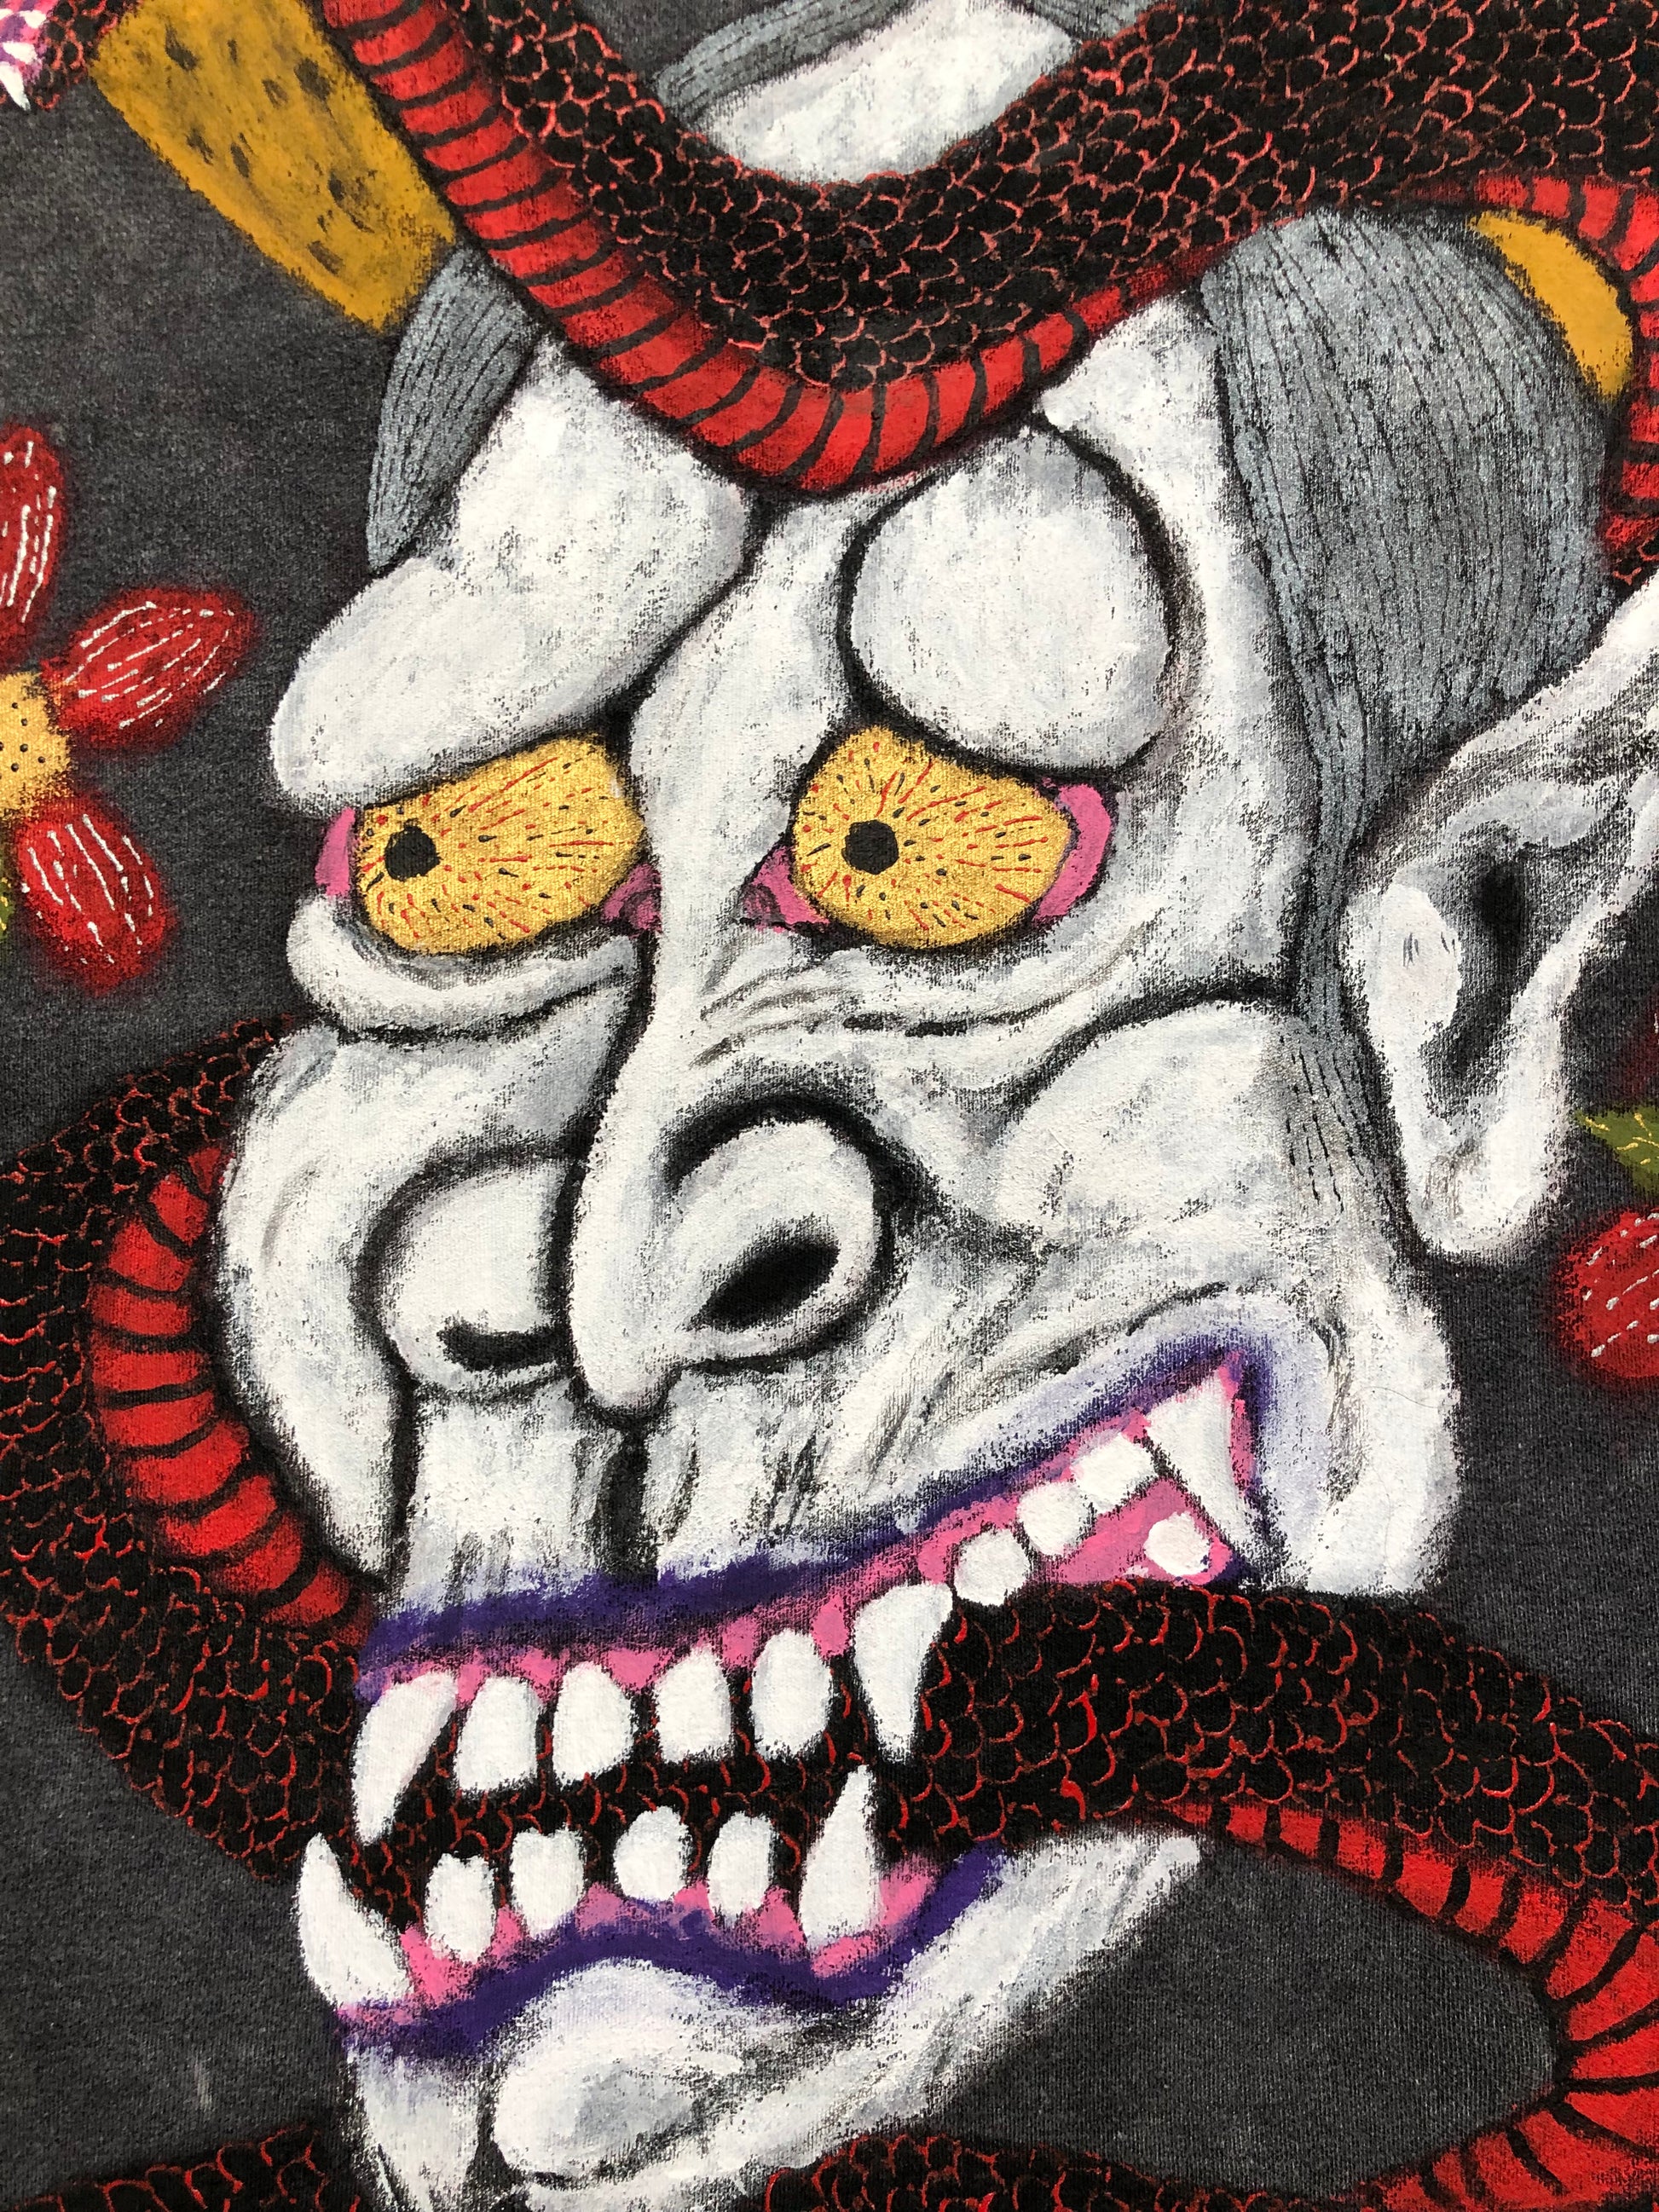 Mask of a Japanese demon on women's clothing in detail